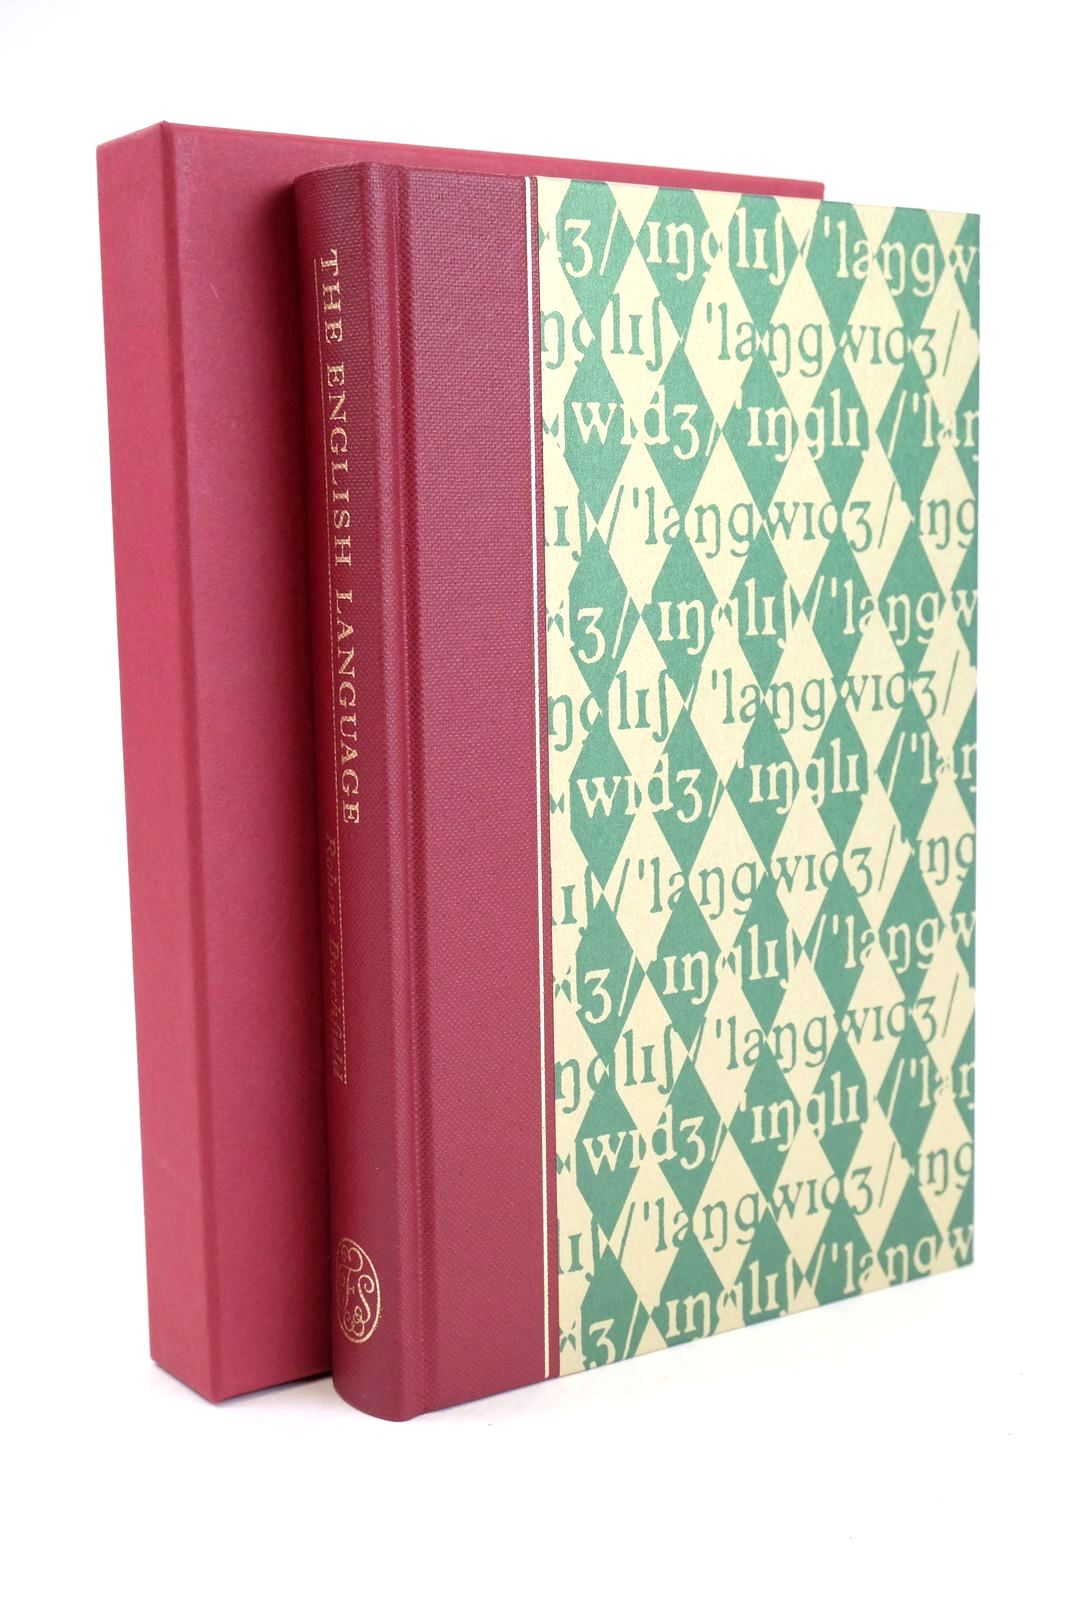 Photo of THE ENGLISH LANGUAGE written by Burchfield, Robert McCrum, Robert Simpson, John published by Folio Society (STOCK CODE: 1325594)  for sale by Stella & Rose's Books